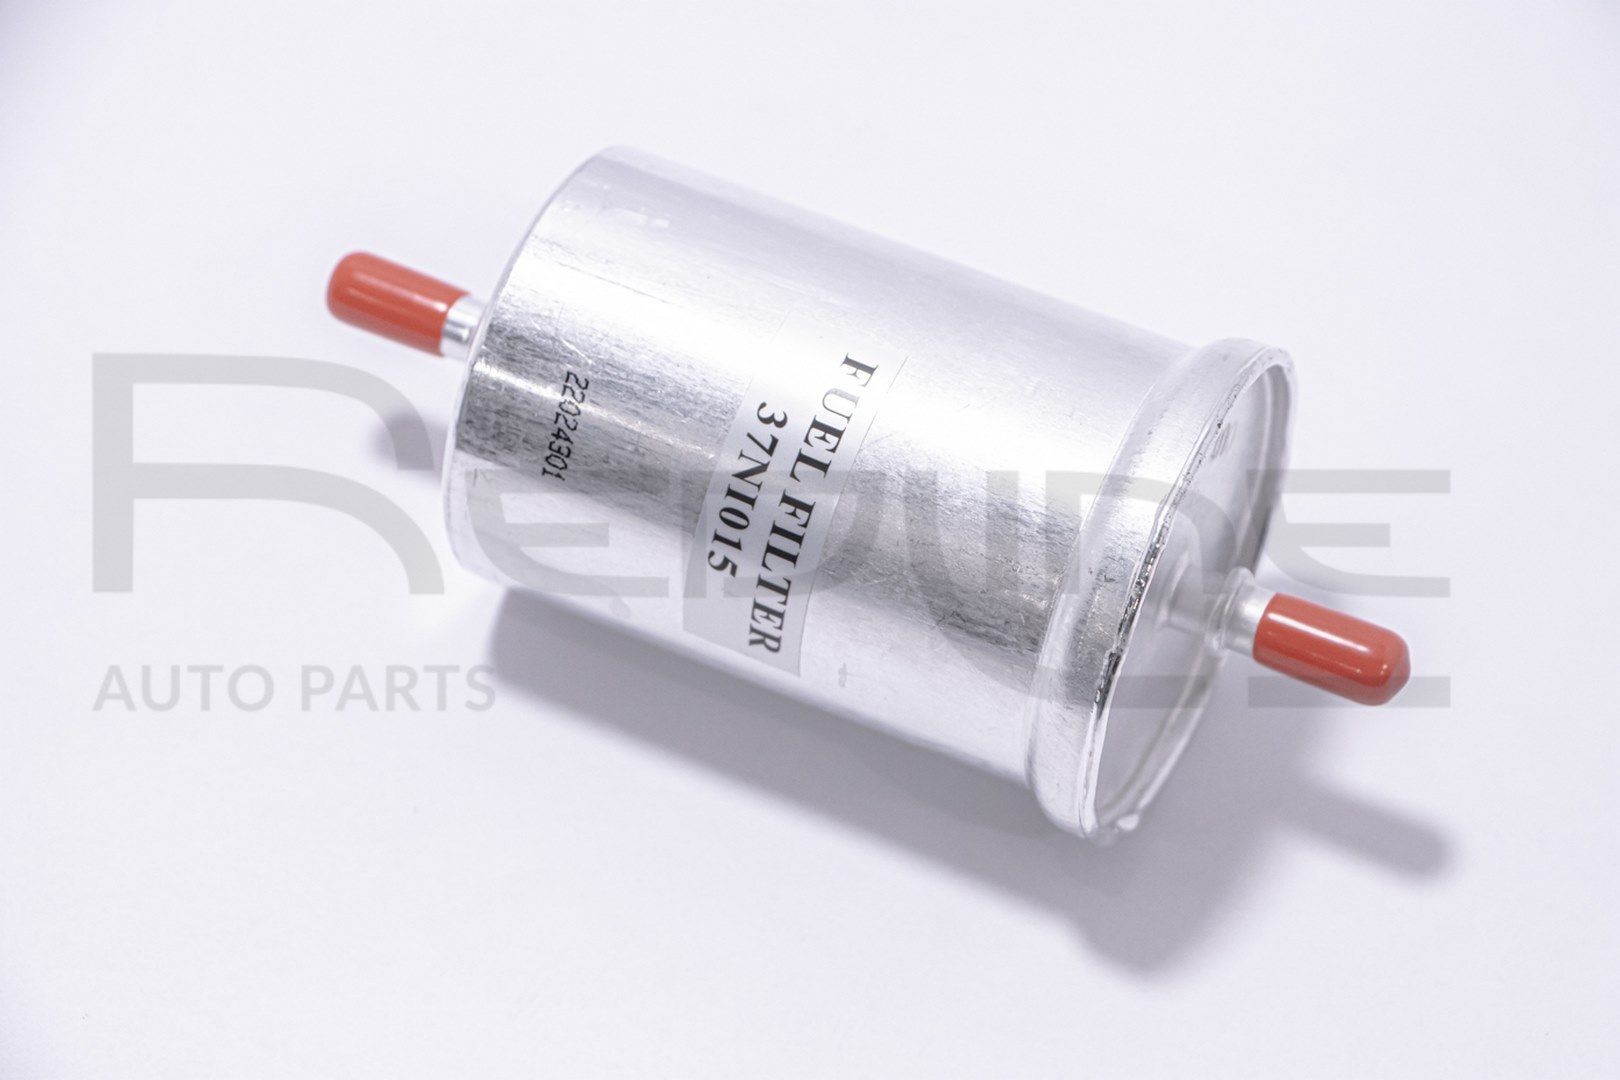 RED-LINE 37NI015 Fuel filter In-Line Filter, 8mm, 8mm